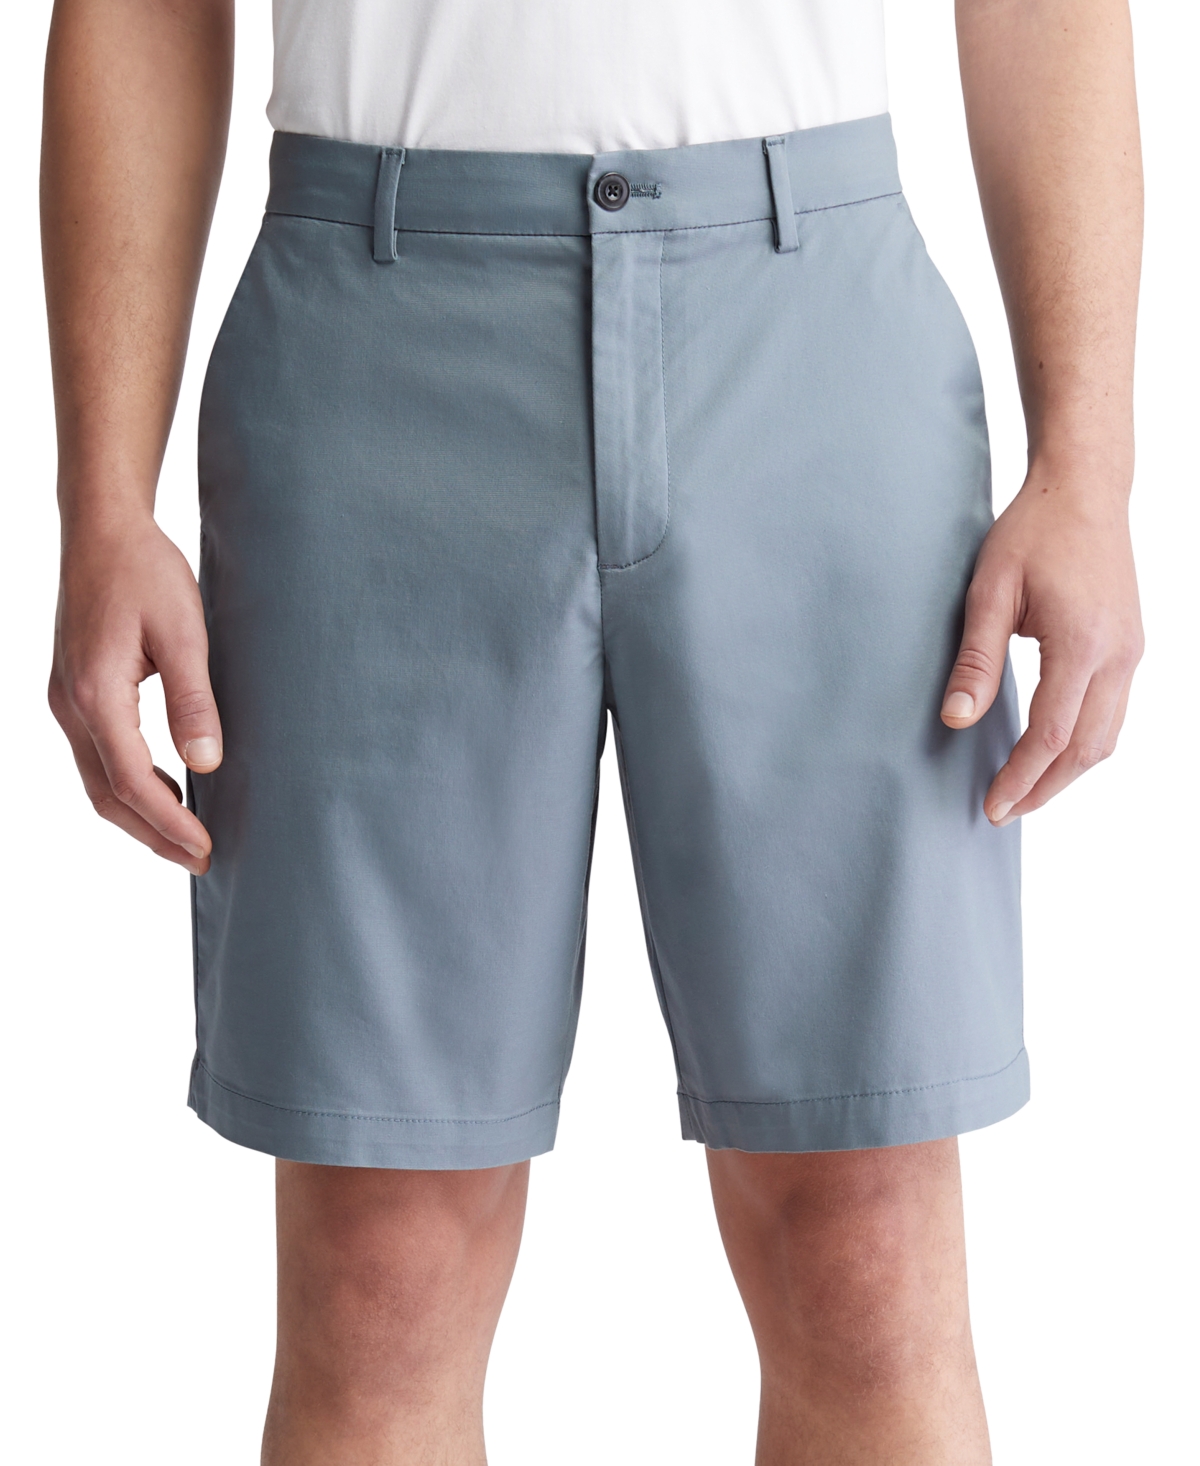 Men's Refined Slim Fit 9" Shorts - Forged Iron